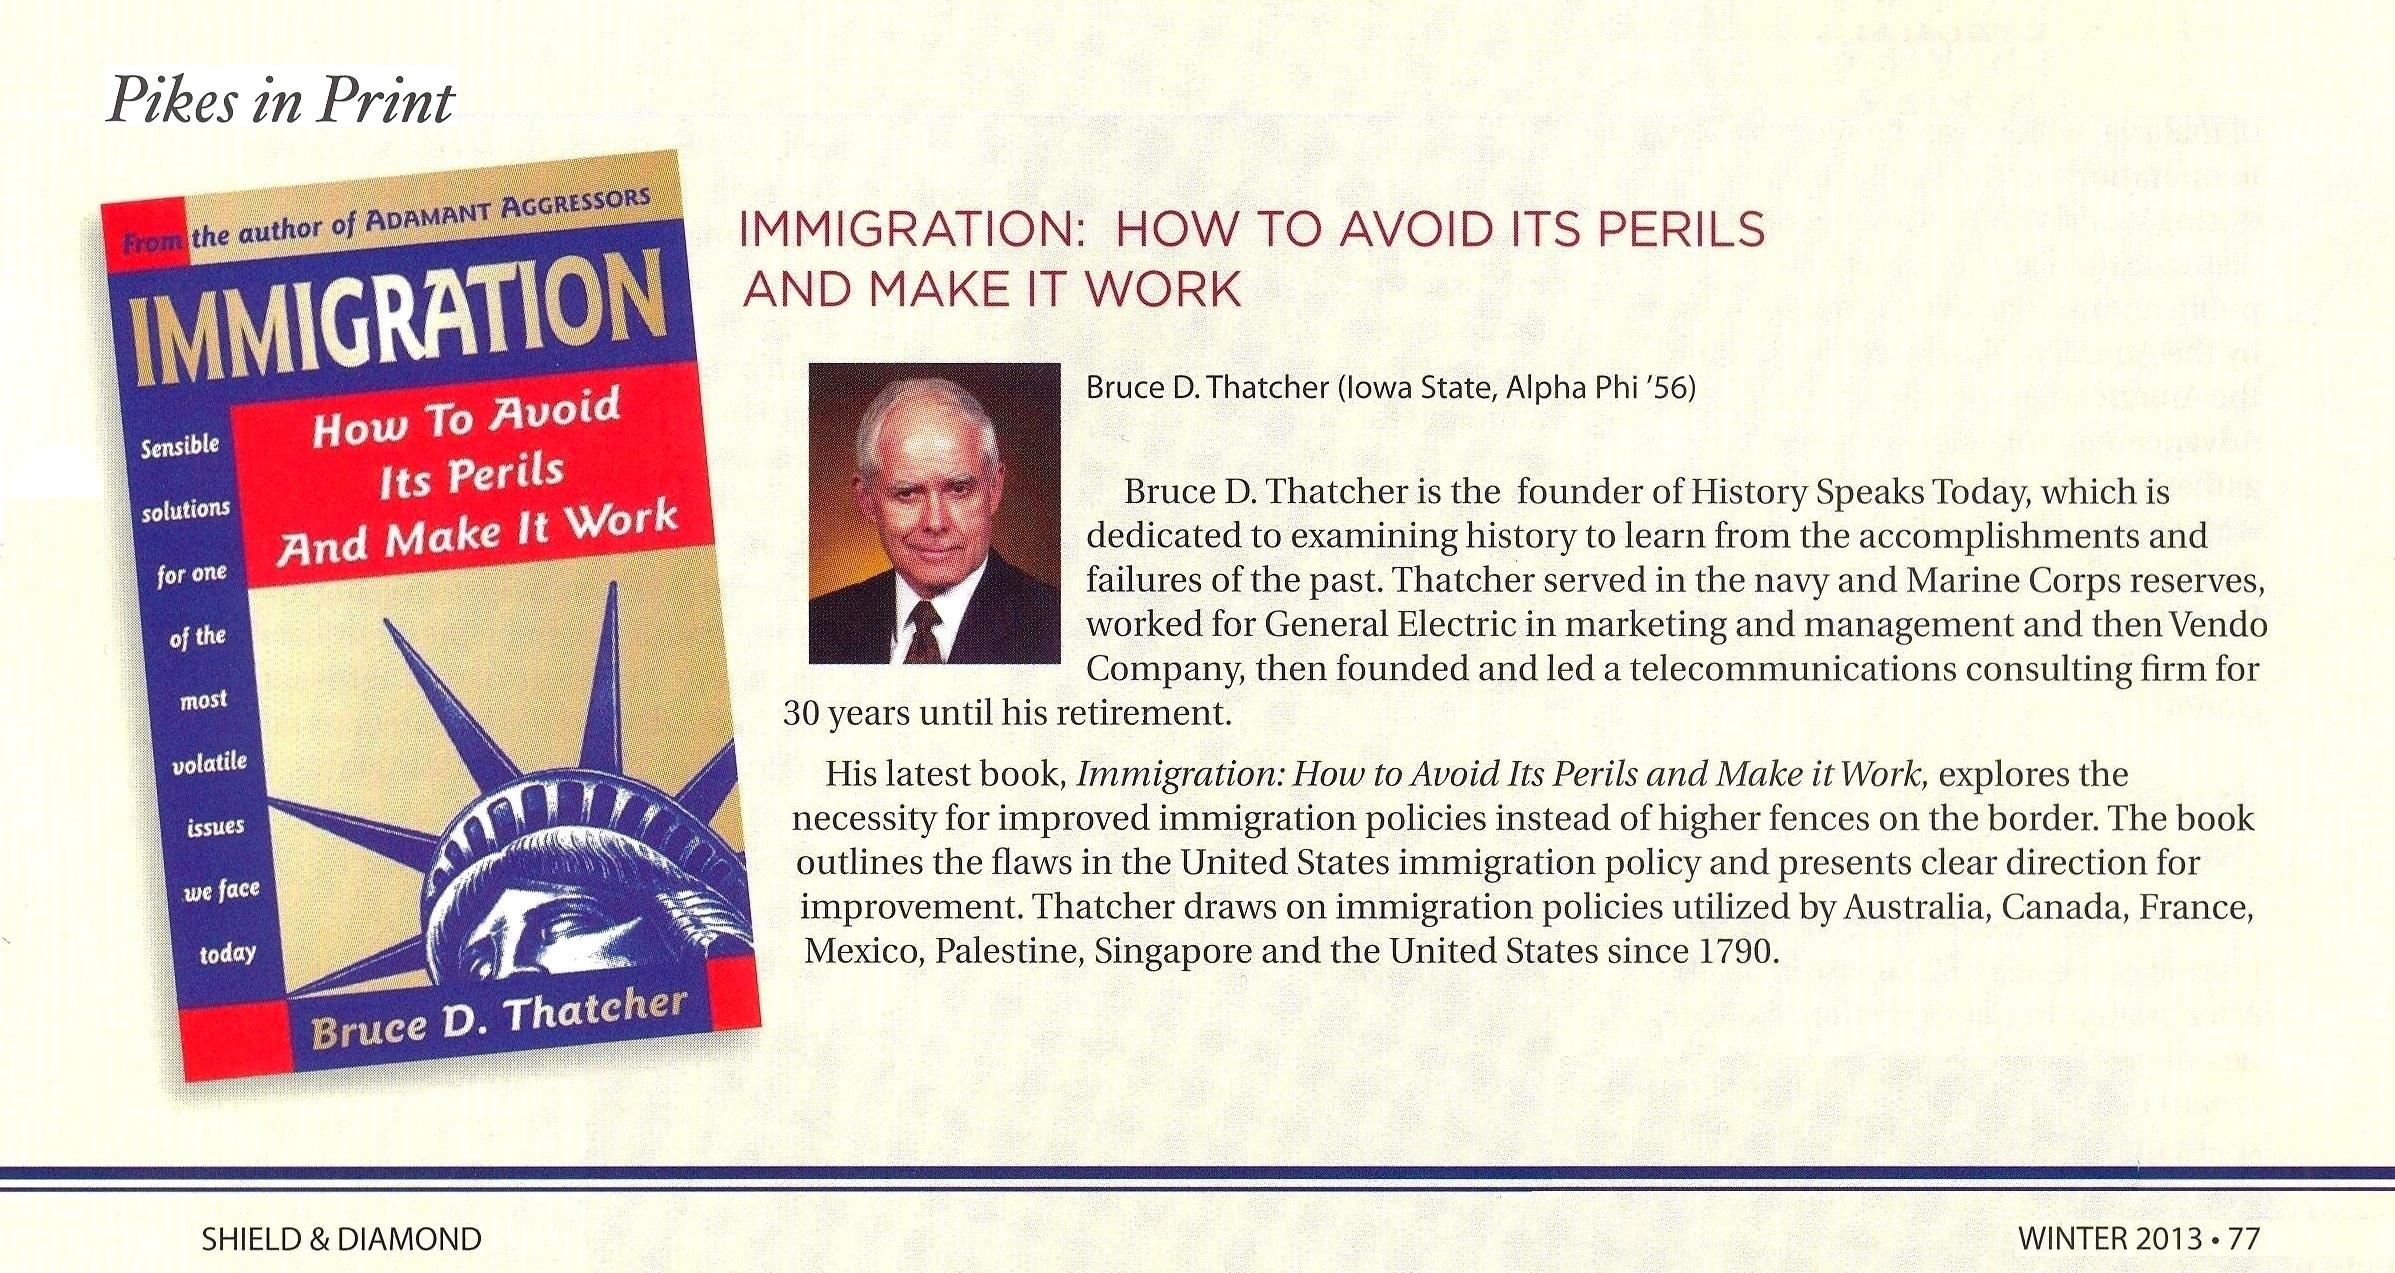 Pikes in Print article featuring Bruce Thatcher's book about immigration